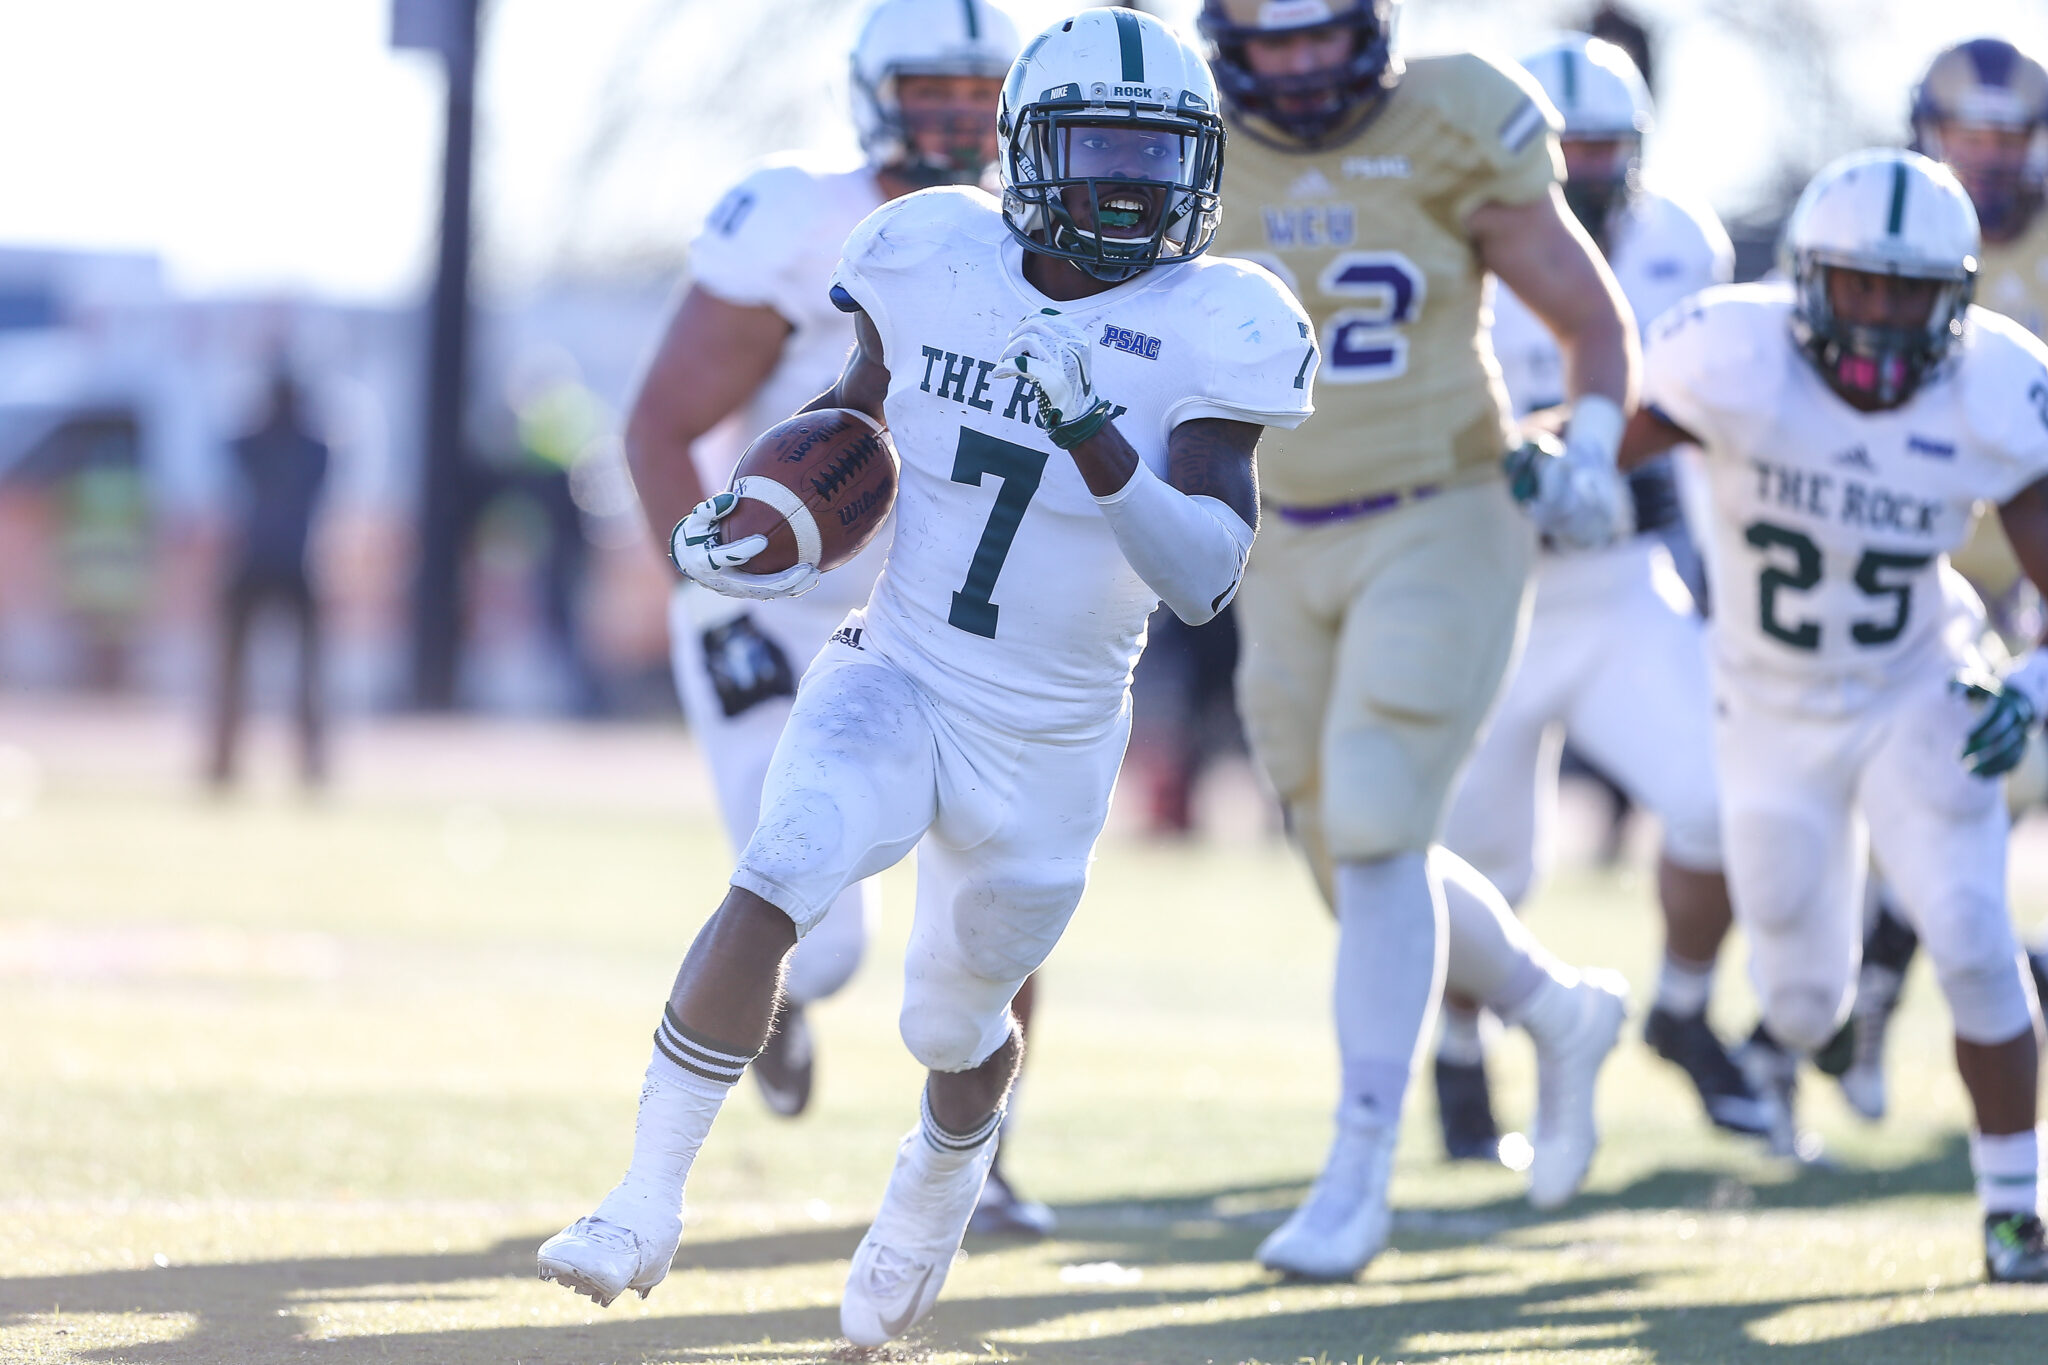 Former SRU football star to receive national honor for valor